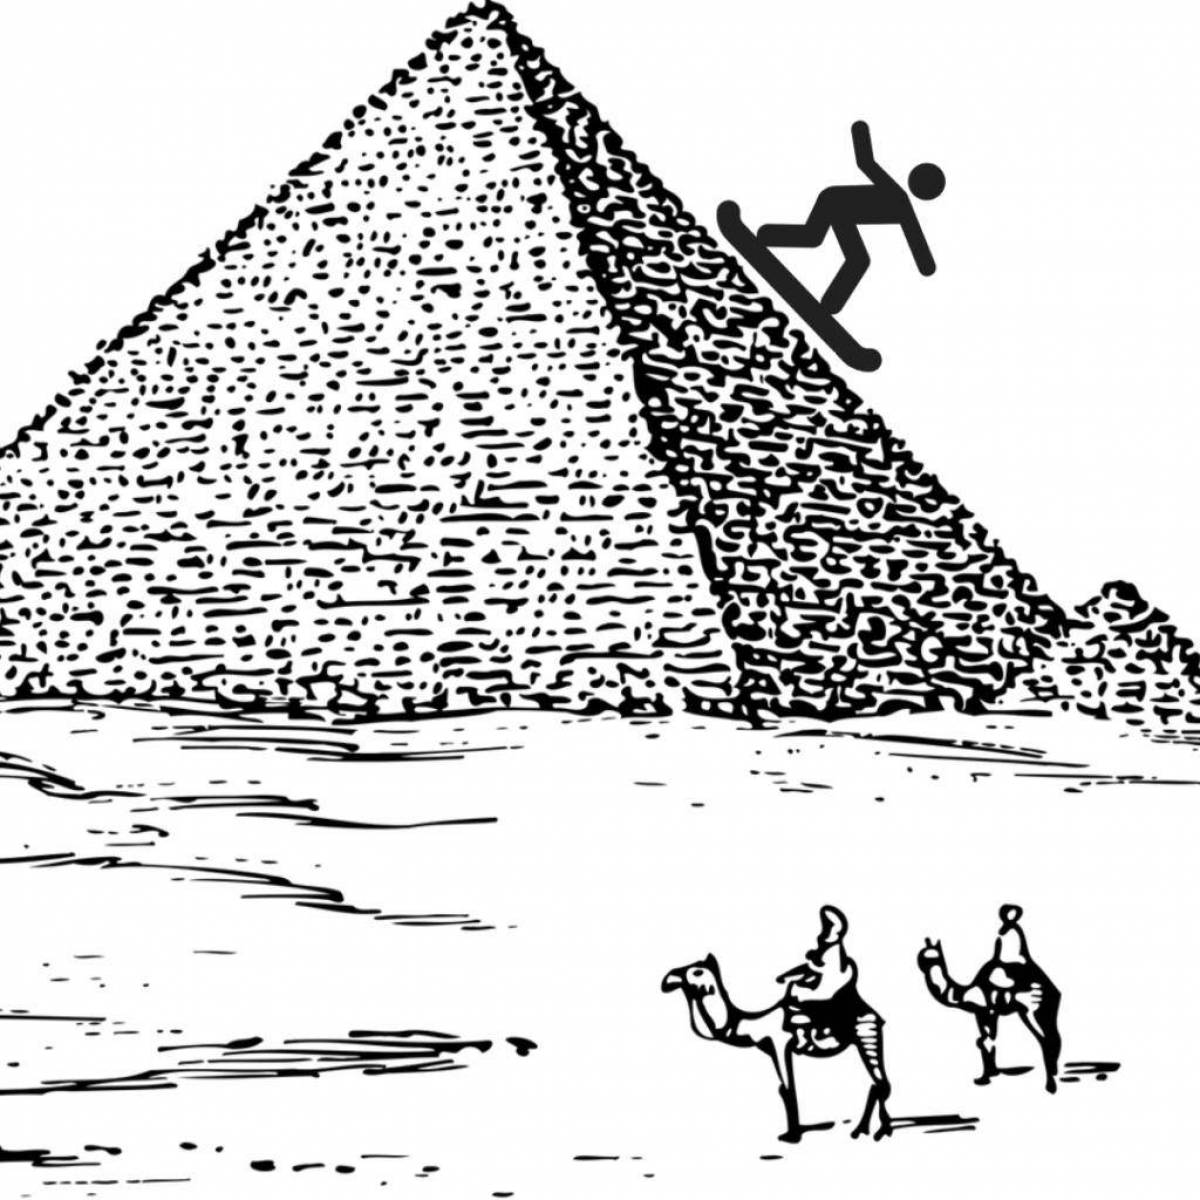 Coloring page monumental pyramid of Cheops